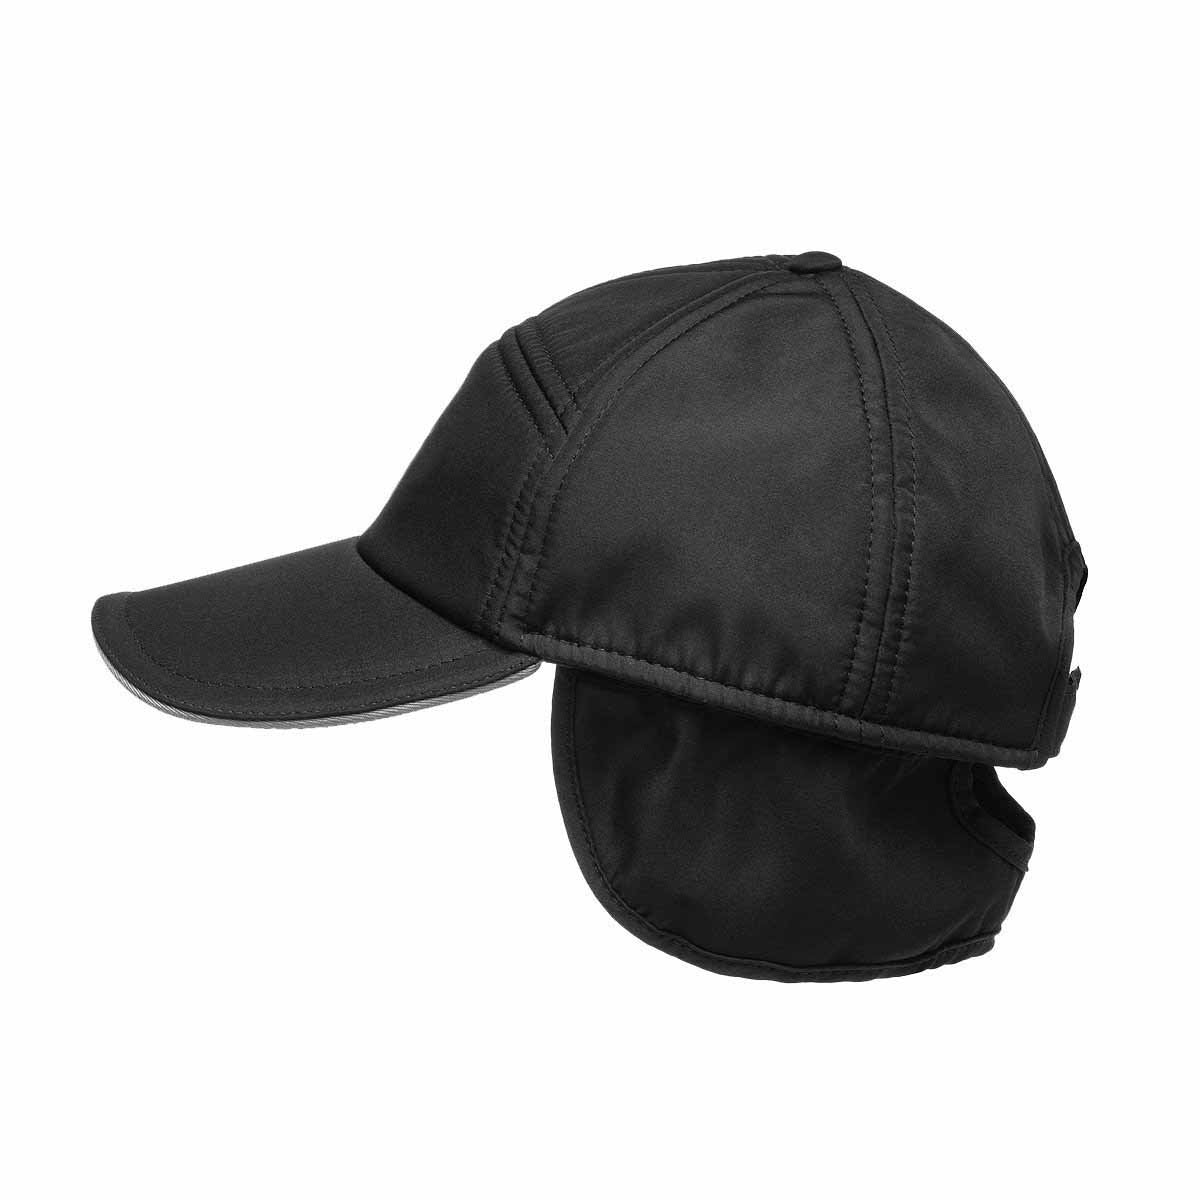 Alfa Winter Baseball Cap Earflaps Trapper for Cold Weather